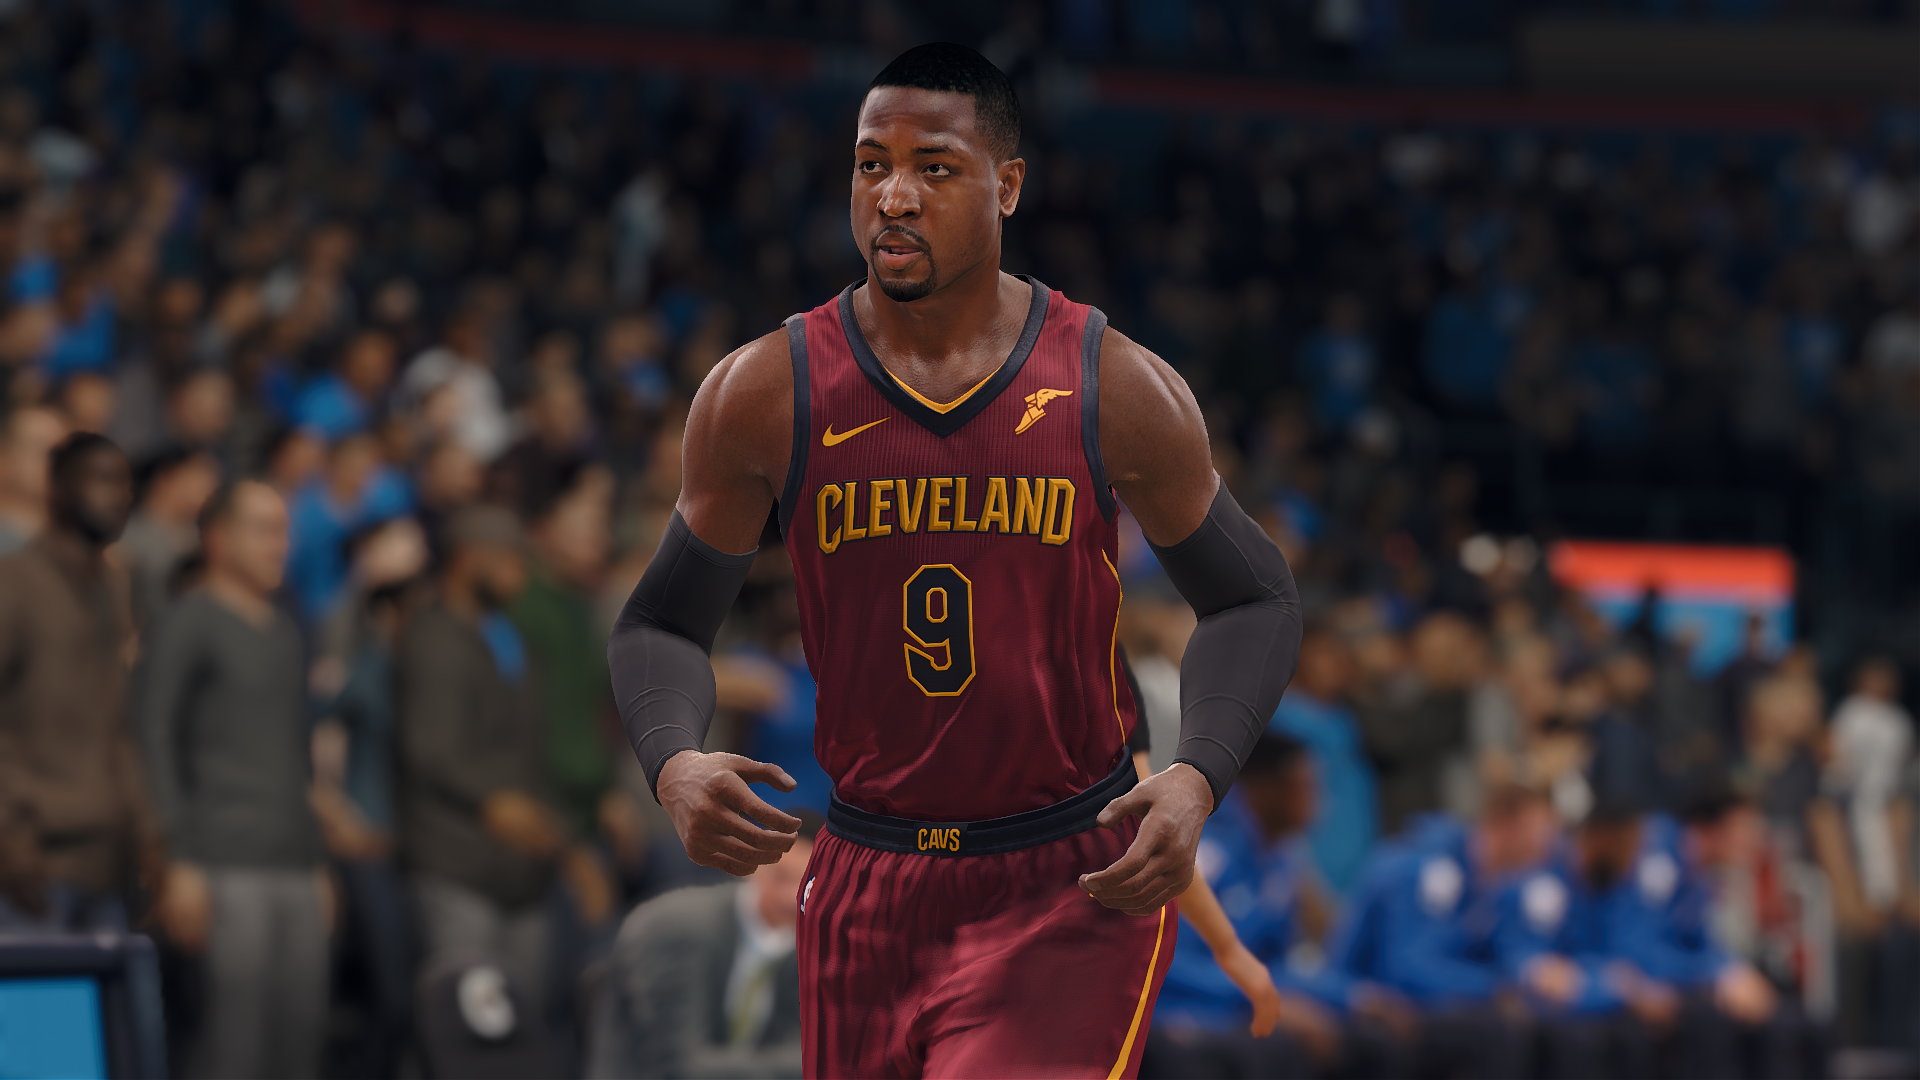 Nba Live Roster Includes Melo Trade Wade